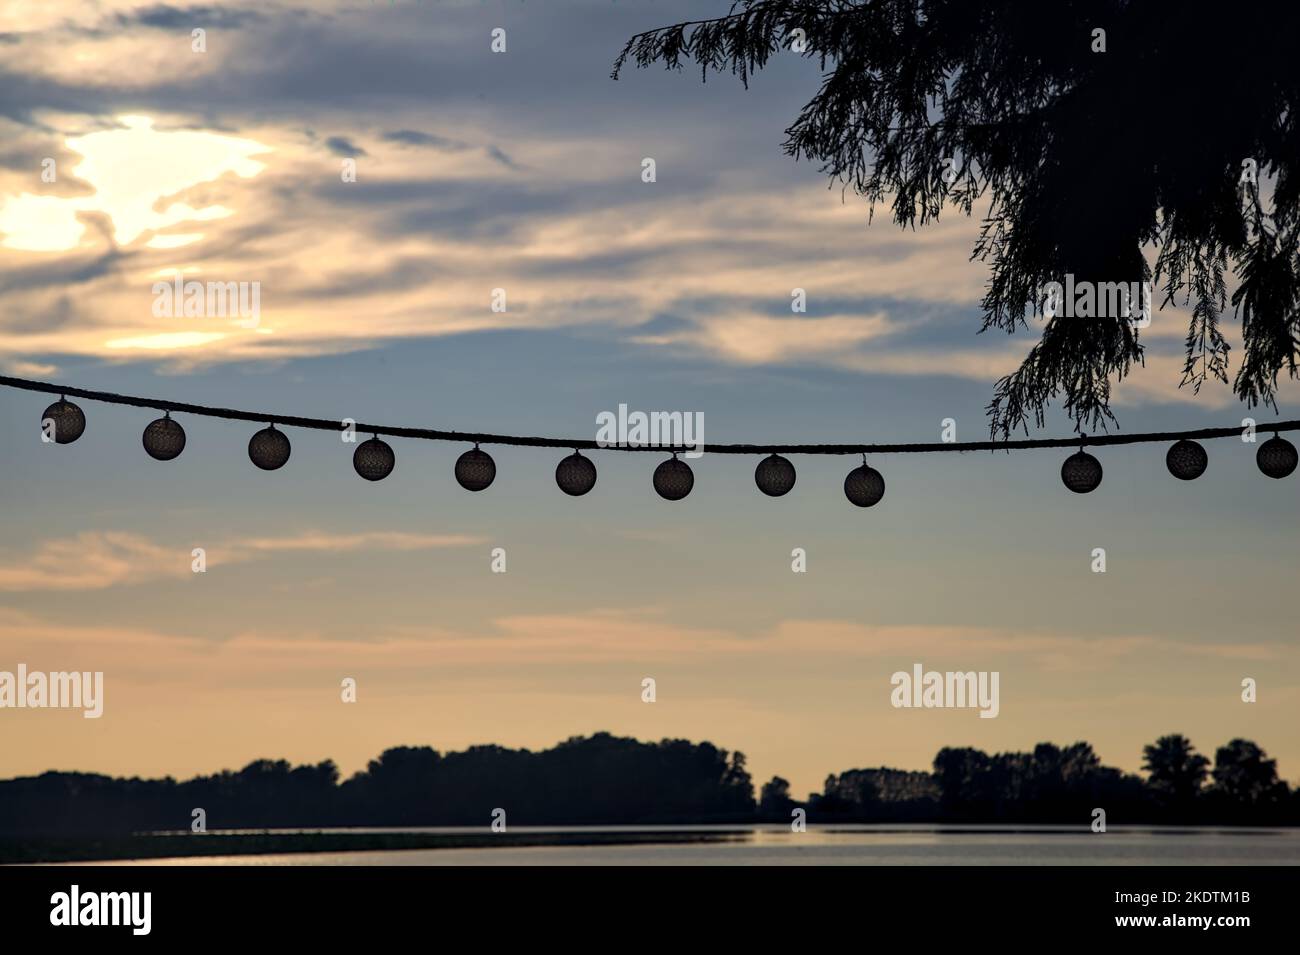 Lights  hanging on a rope with the sunset sky as background Stock Photo